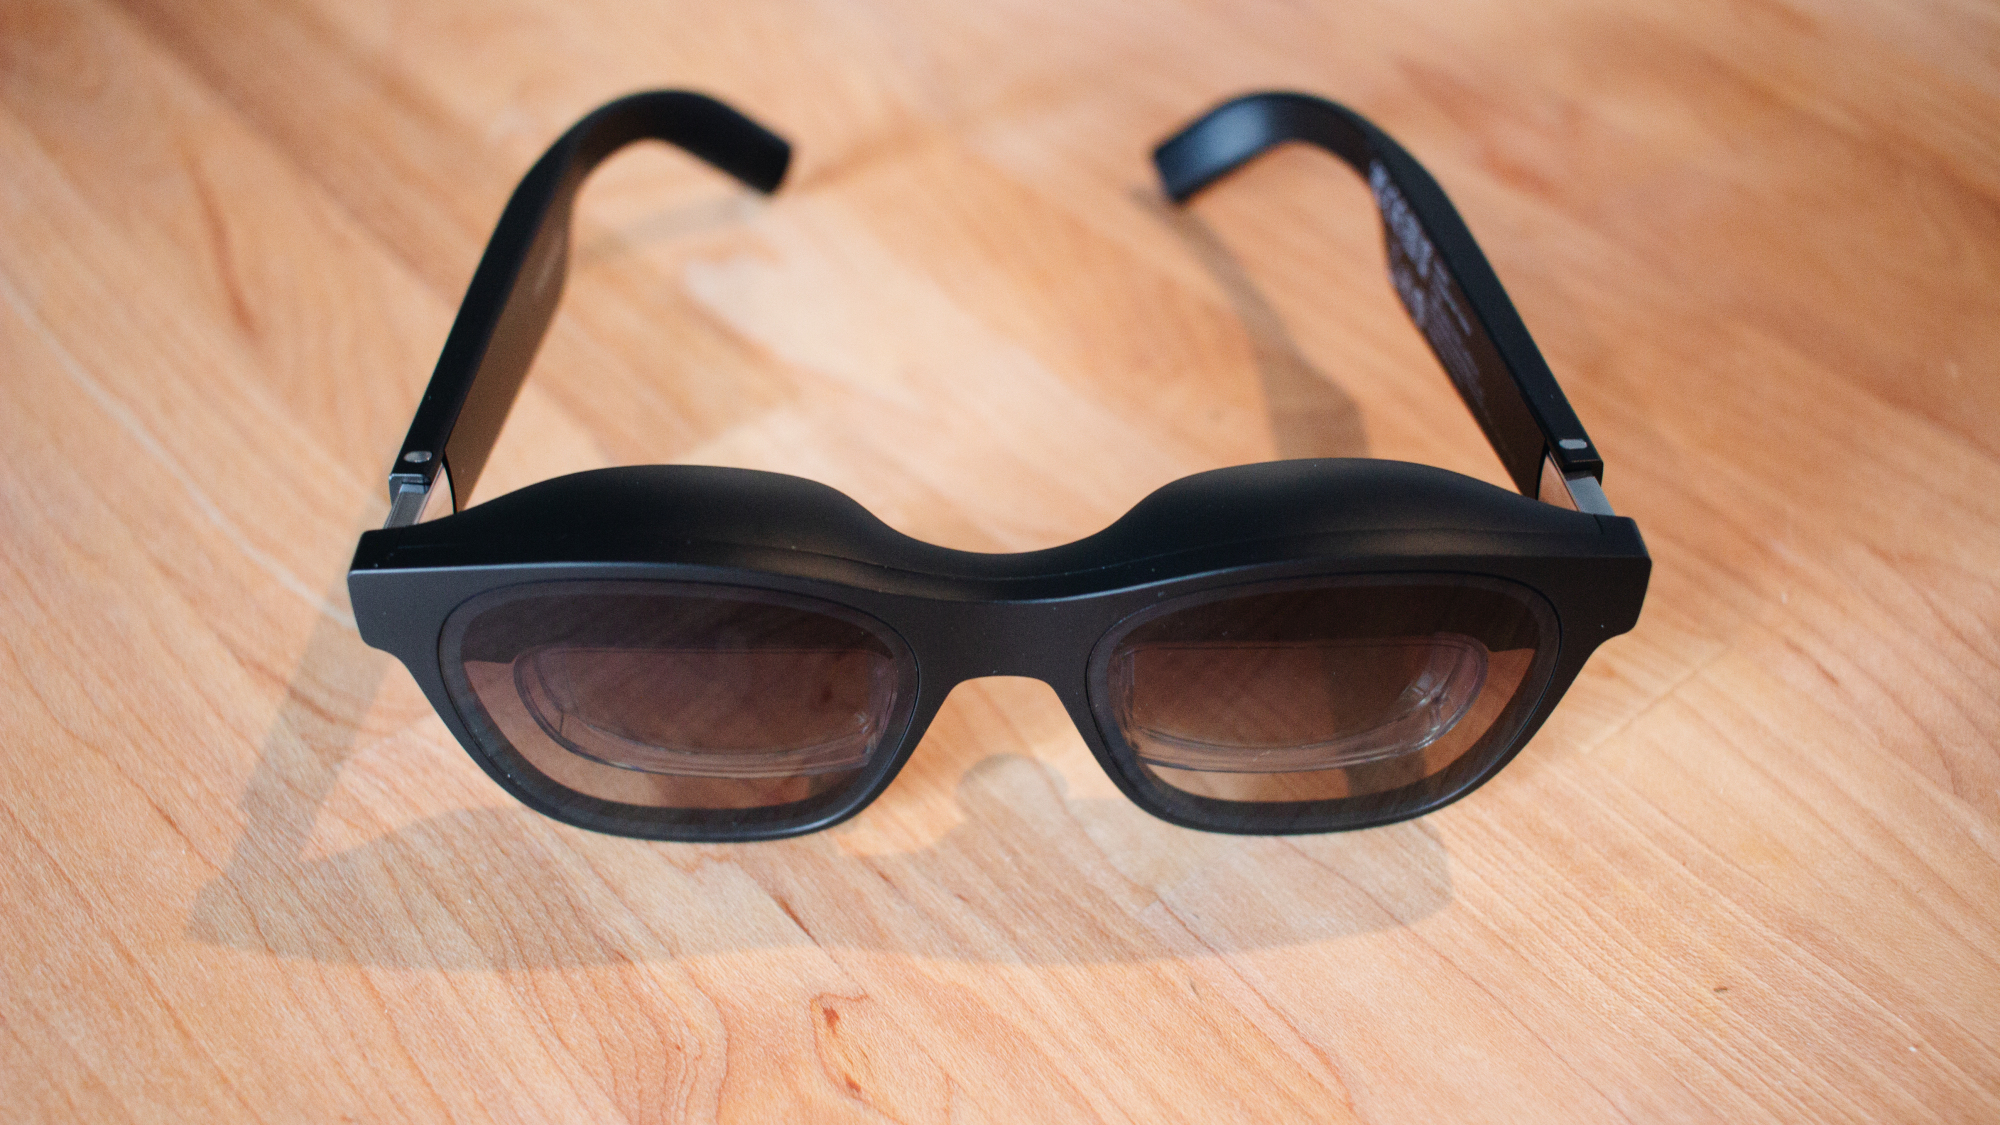 pair of tinted AR glasses with extra material to shade above the eyes